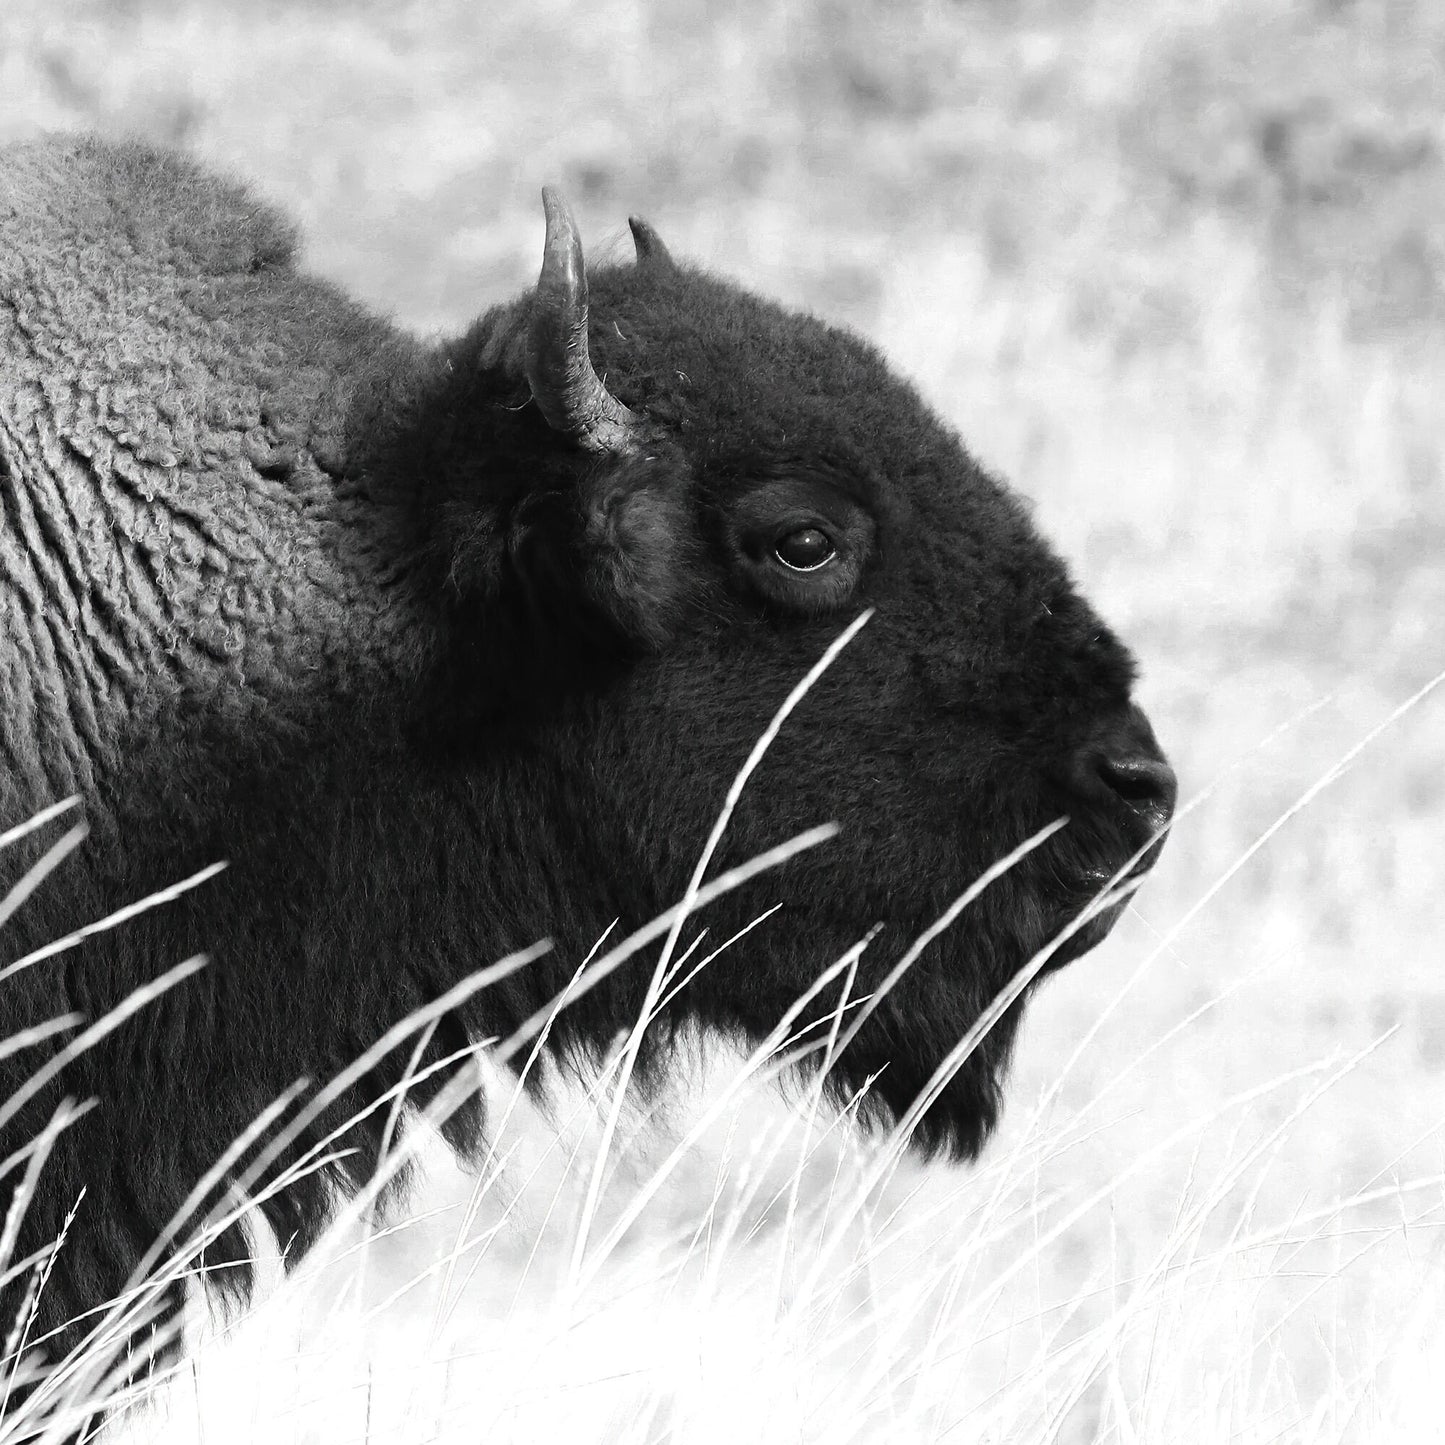 Bison photo print, buffalo wall art, Yellowstone NP picture, animal decor, black and white photography, large paper or canvas, 5x7 to 20x30"